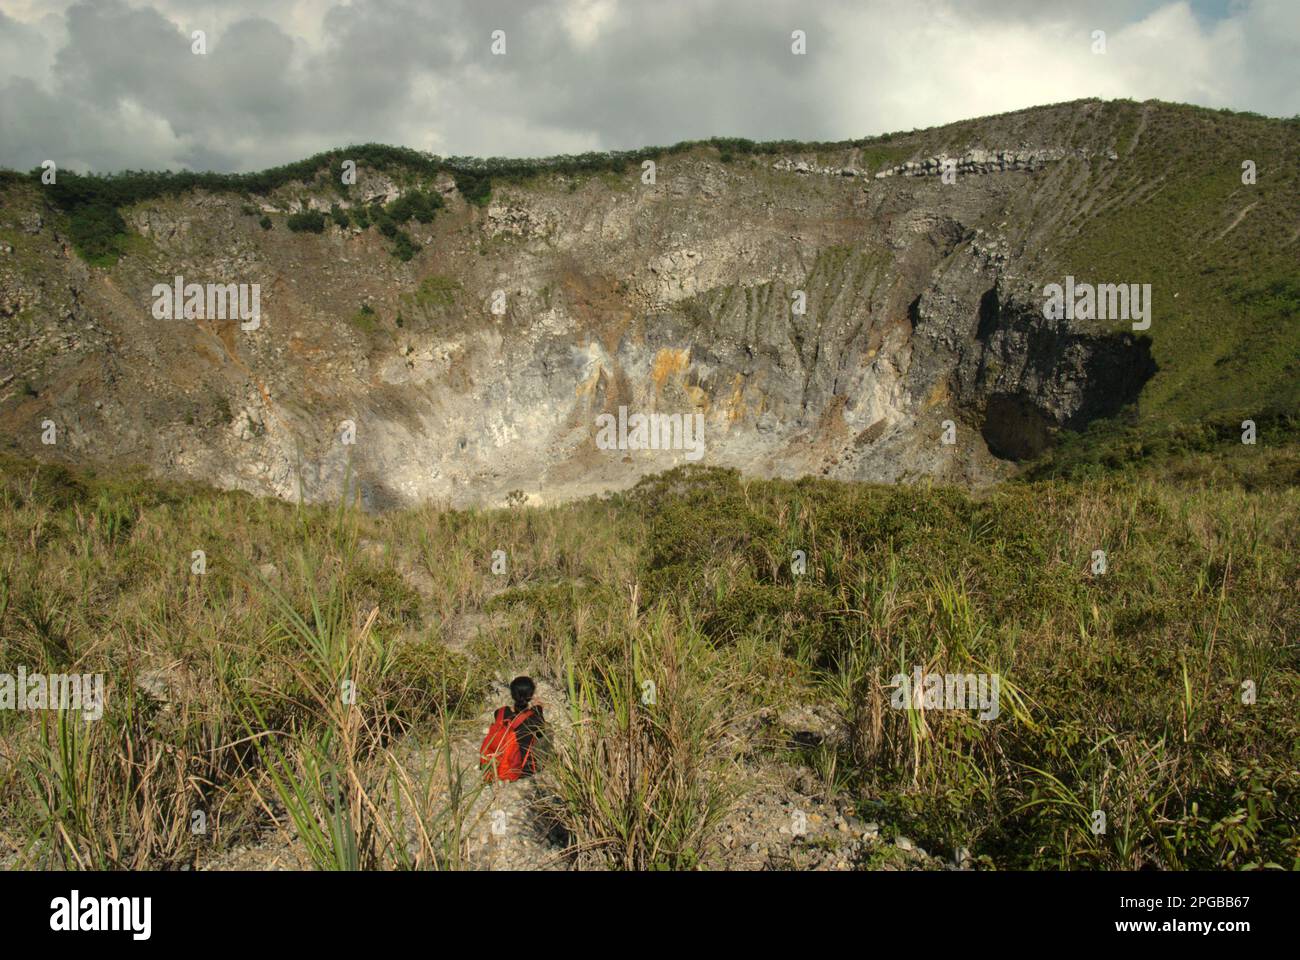 The crater of Mount Mahawu volcano in Tomohon, North Sulawesi, Indonesia. Stock Photo